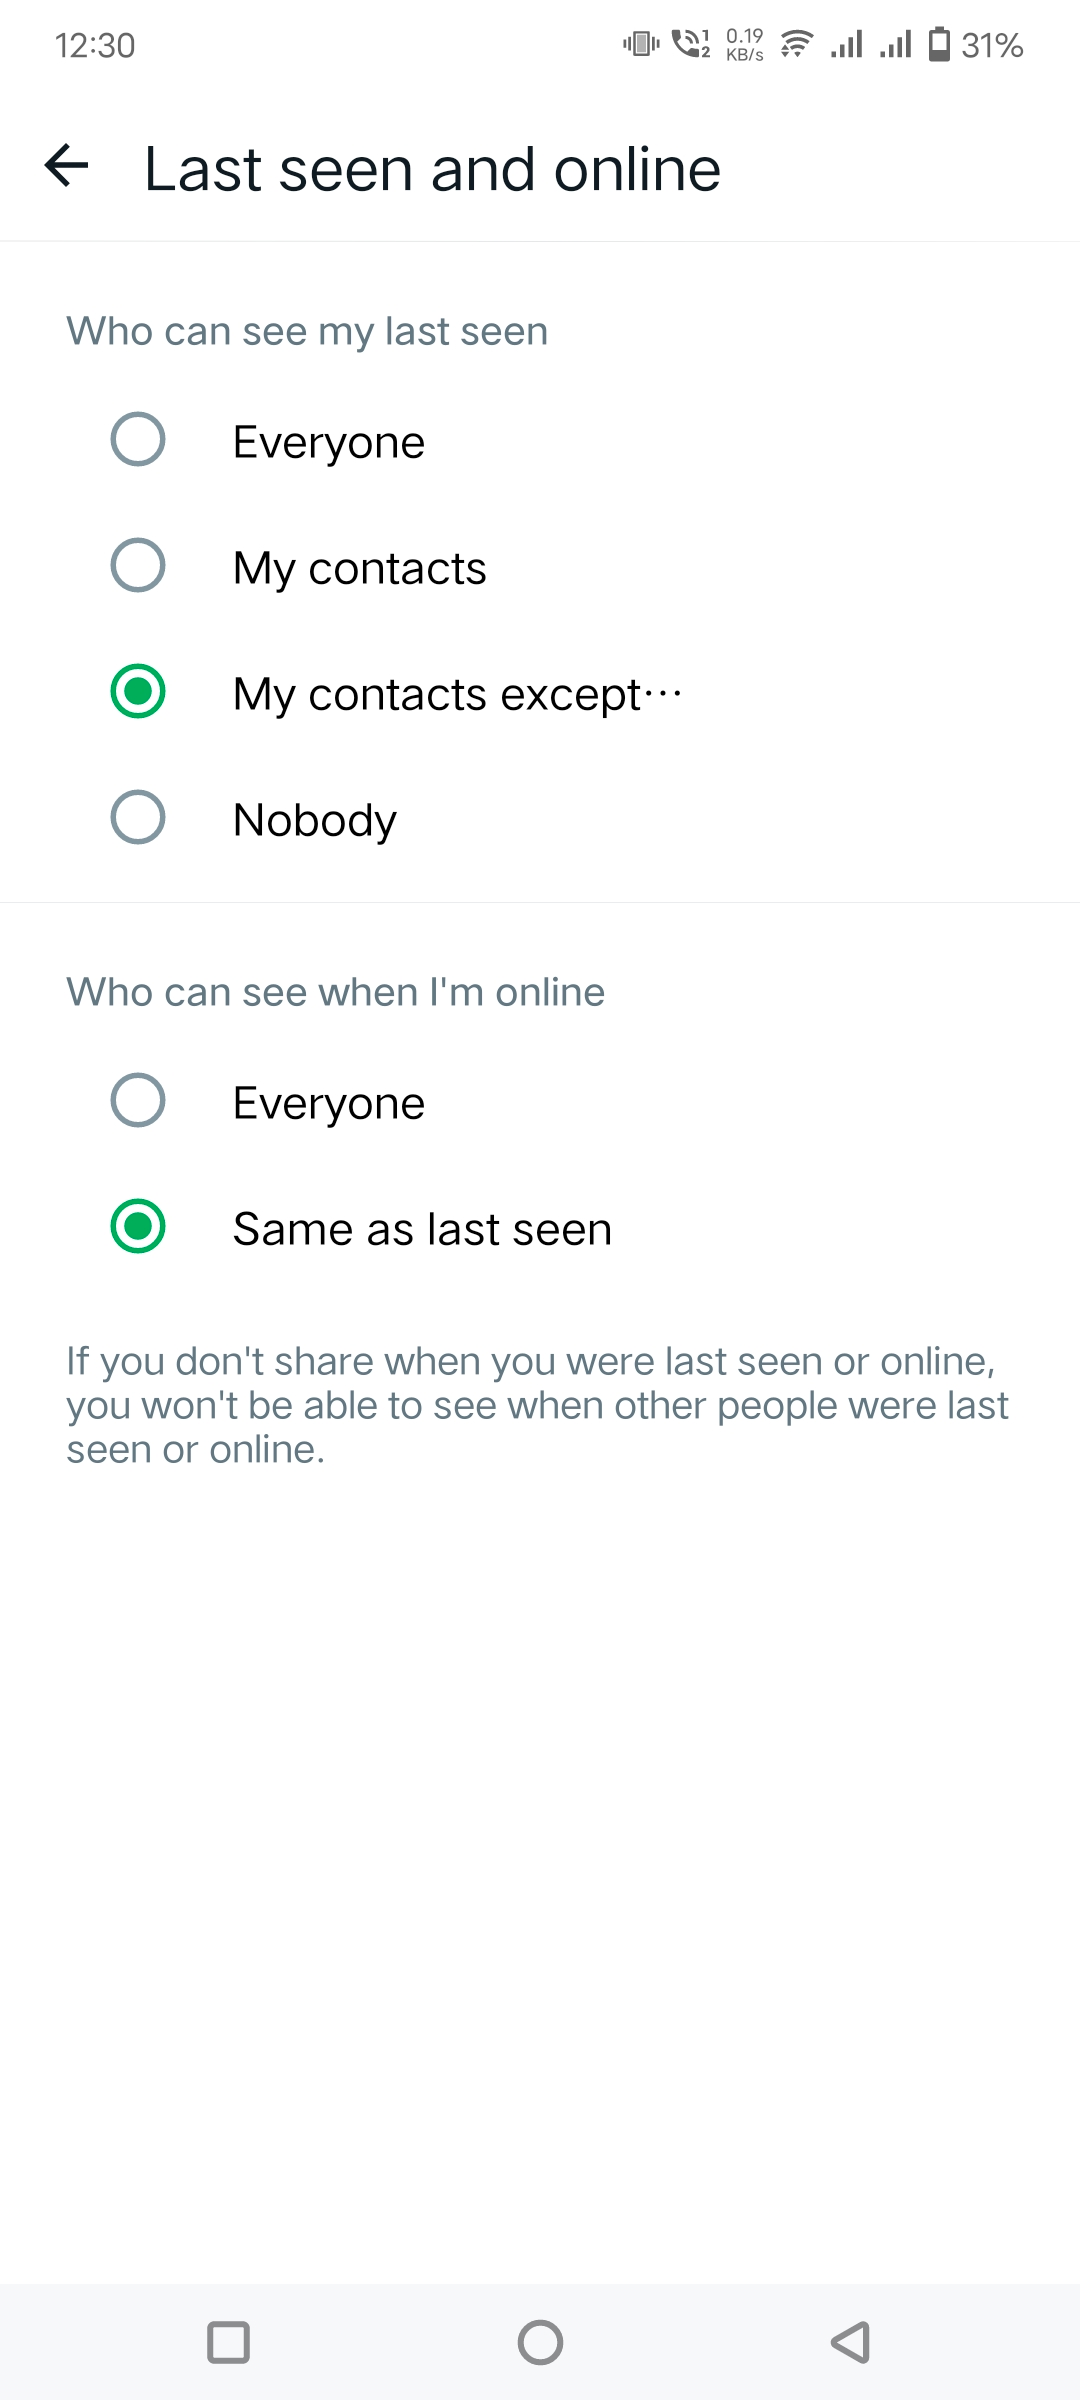 last seen and online setting in WhatsApp